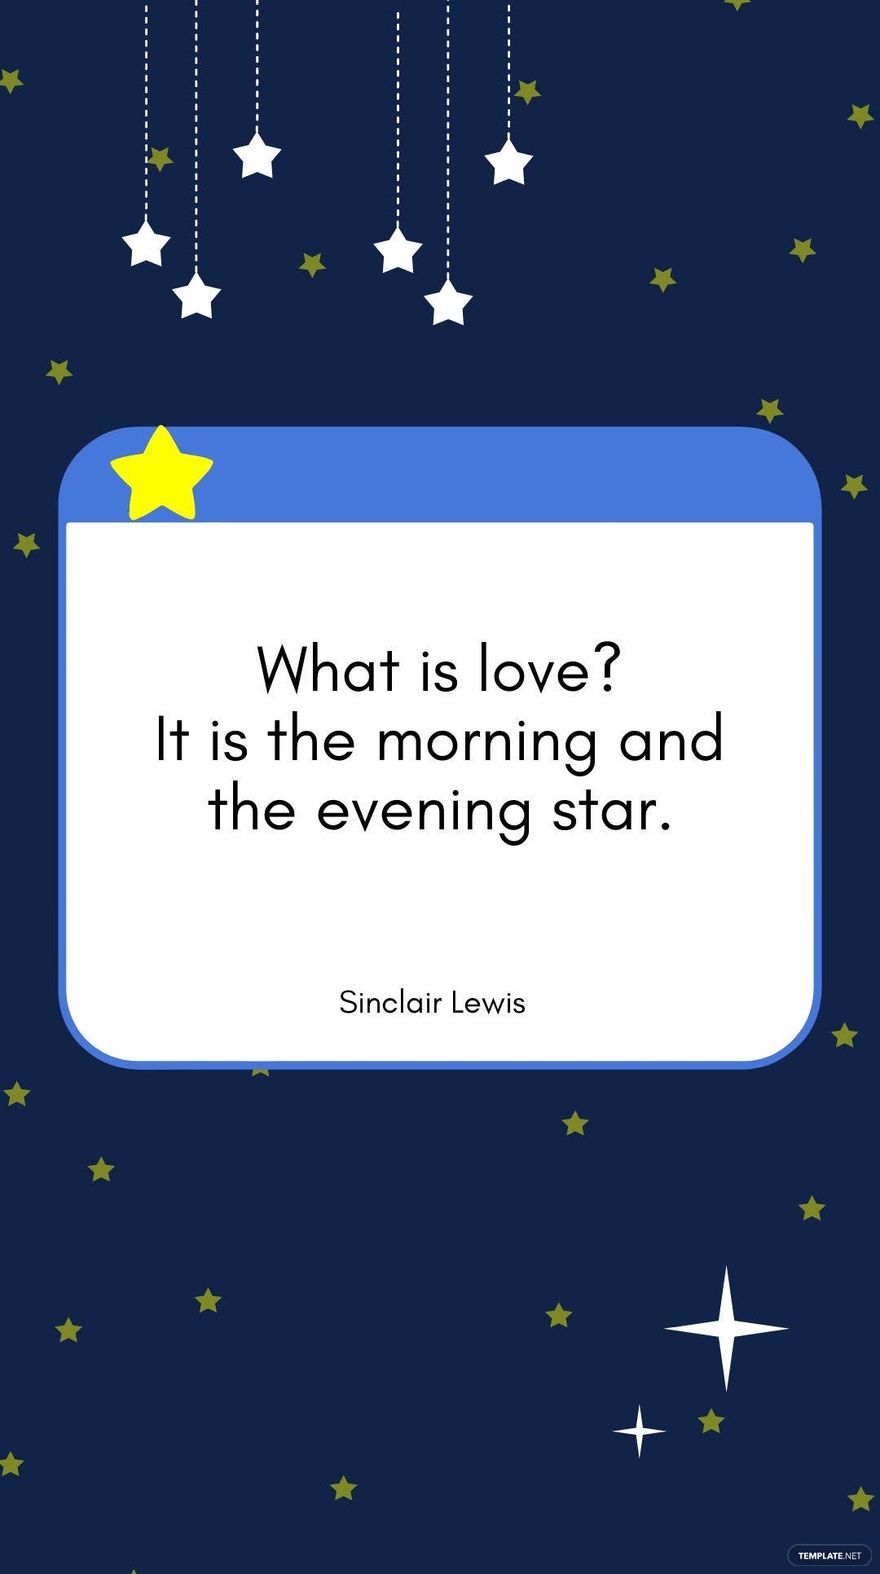 Sinclair Lewis - “What is love? It is the morning and the evening star.” 